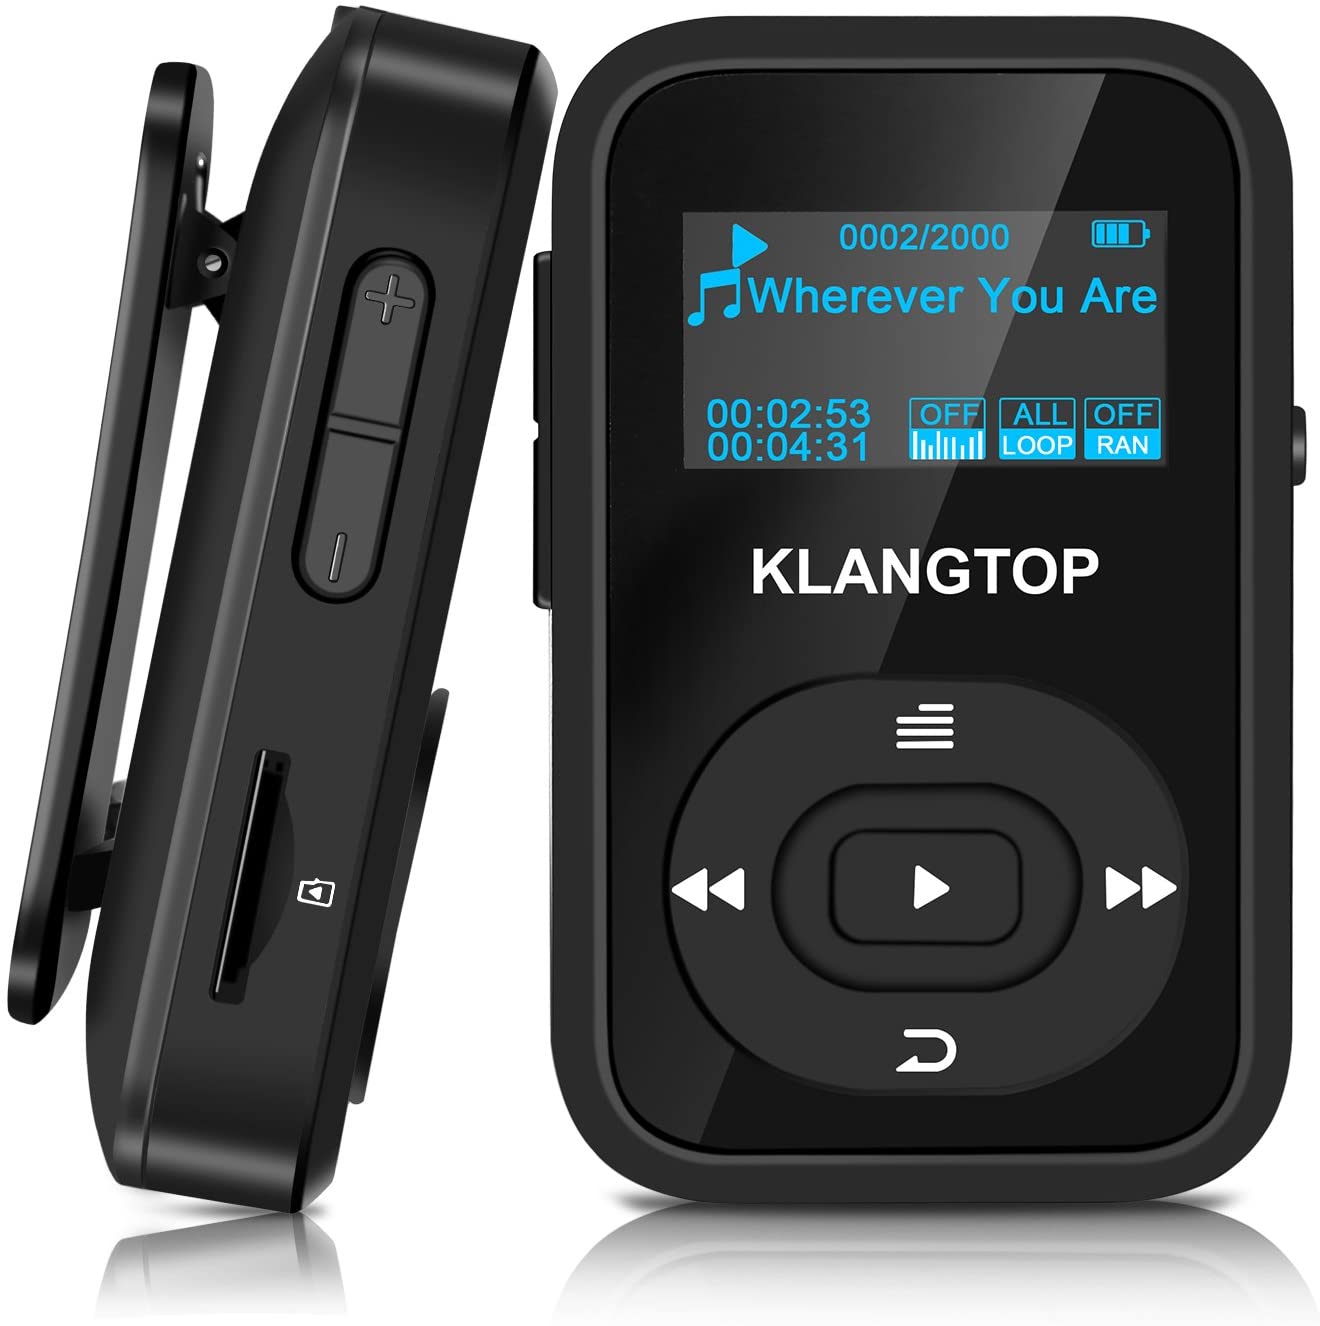 MP3 Player Bluetooth 8GB KLANGTOP Digital Clip Music Player with FM Radio Voice Record Function